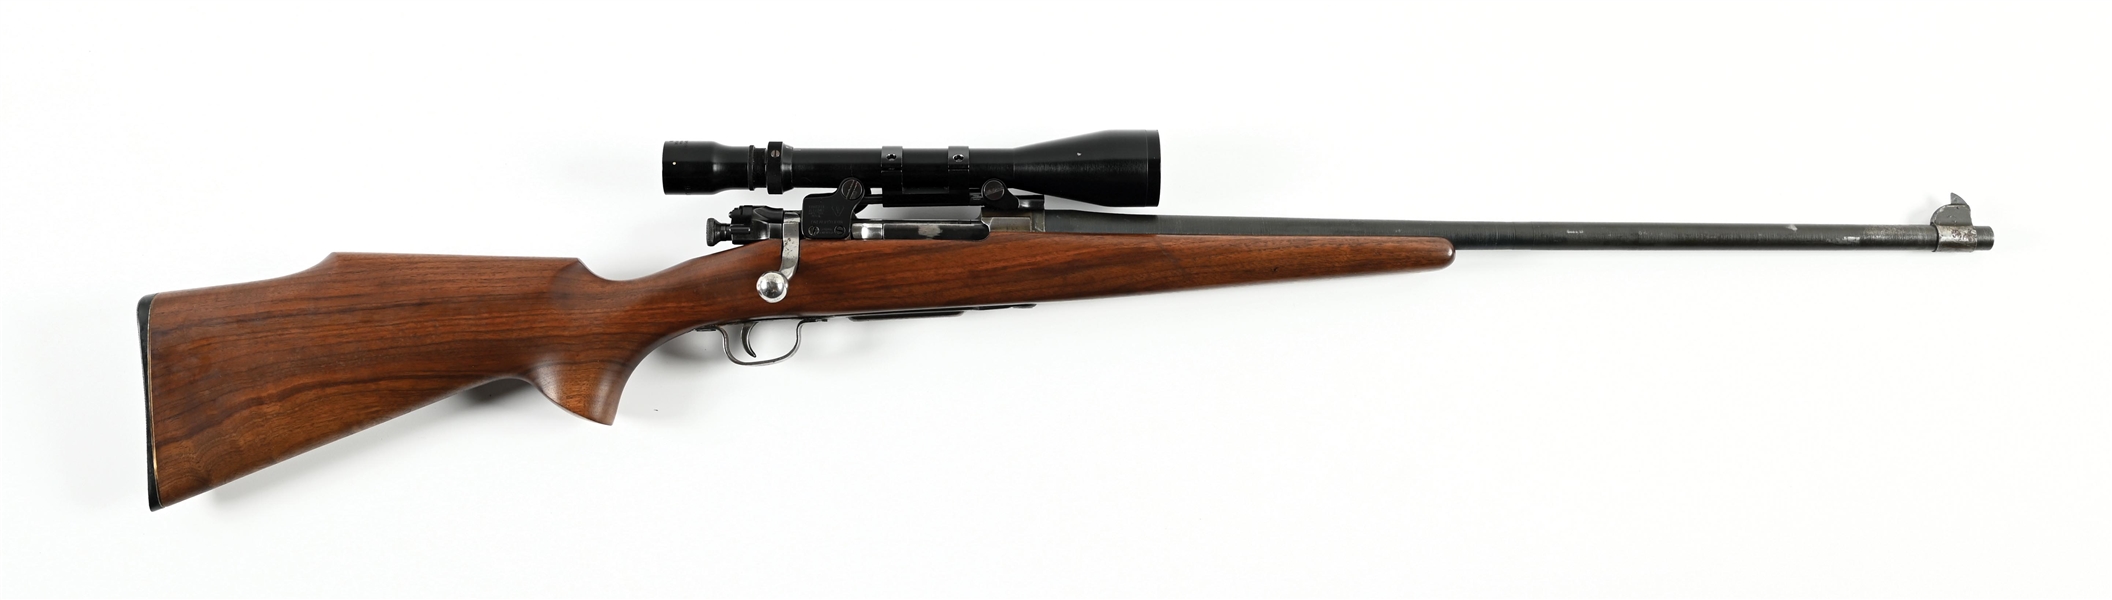 (C) REMINGTON MODEL 1903A3 SPORTERIZED BOLT ACTION RIFLE WITH SCOPE.